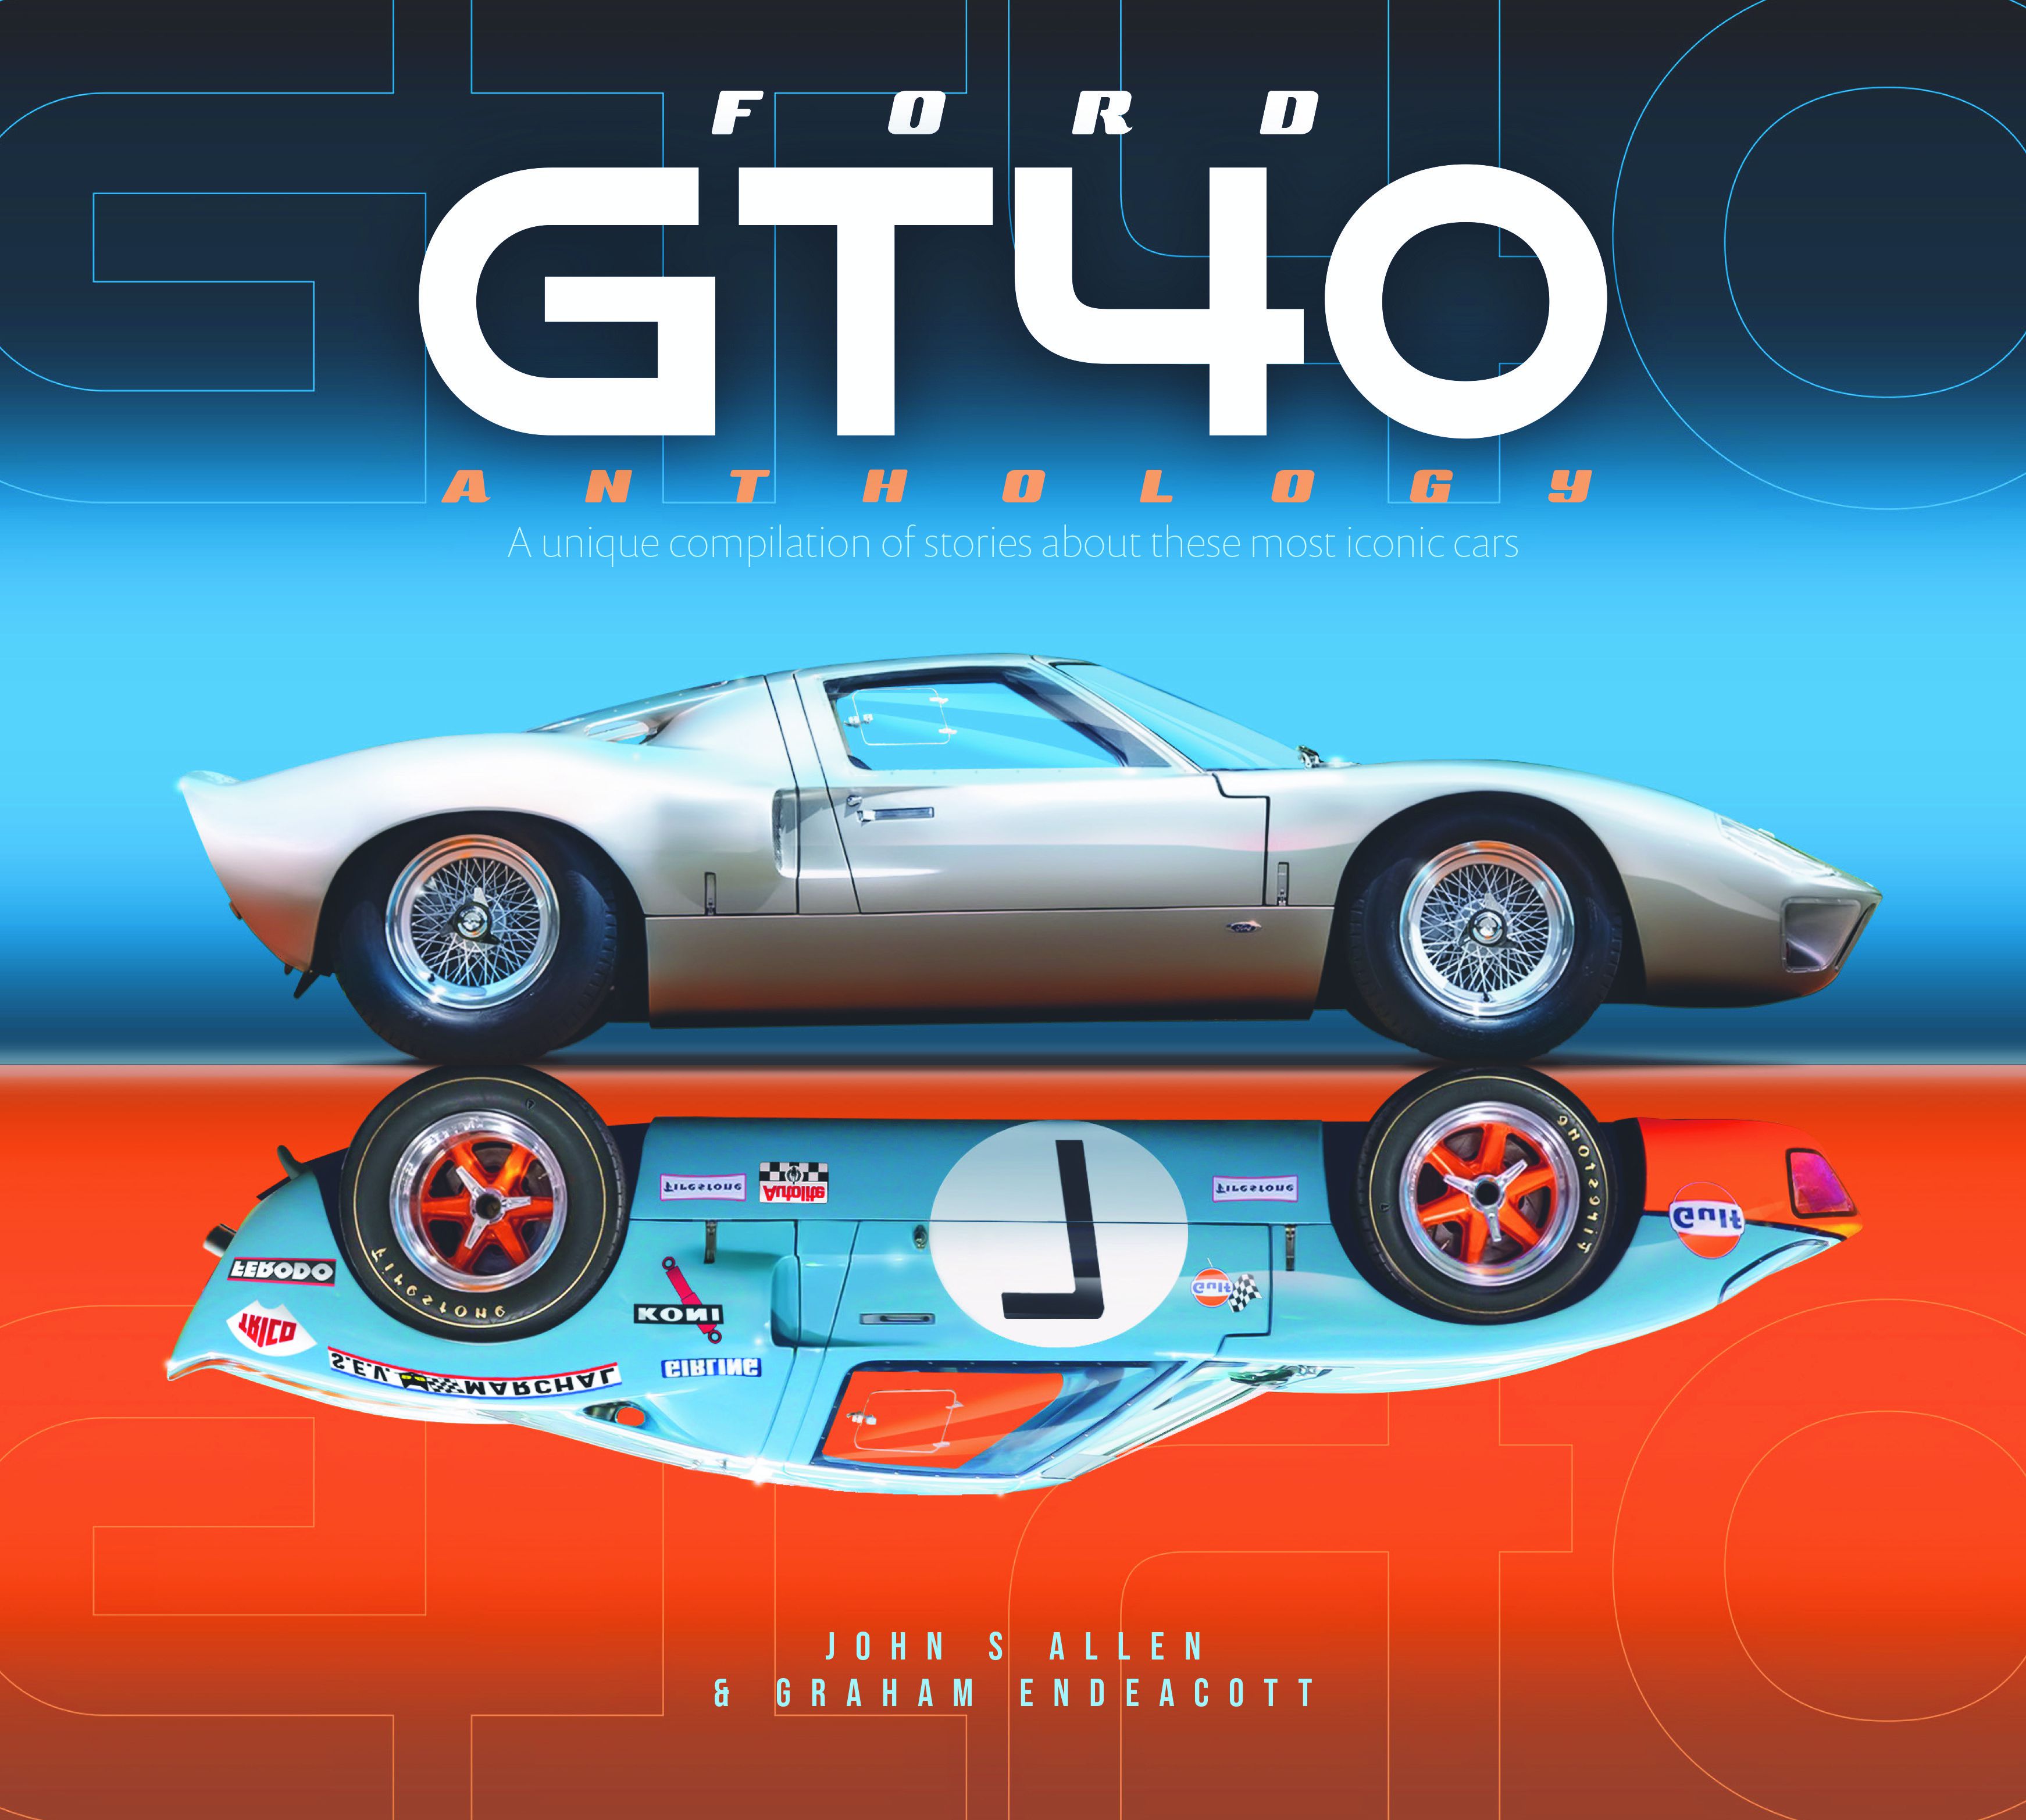 Colin-on-Cars - Insights into the Ford GT40 revealed in new book